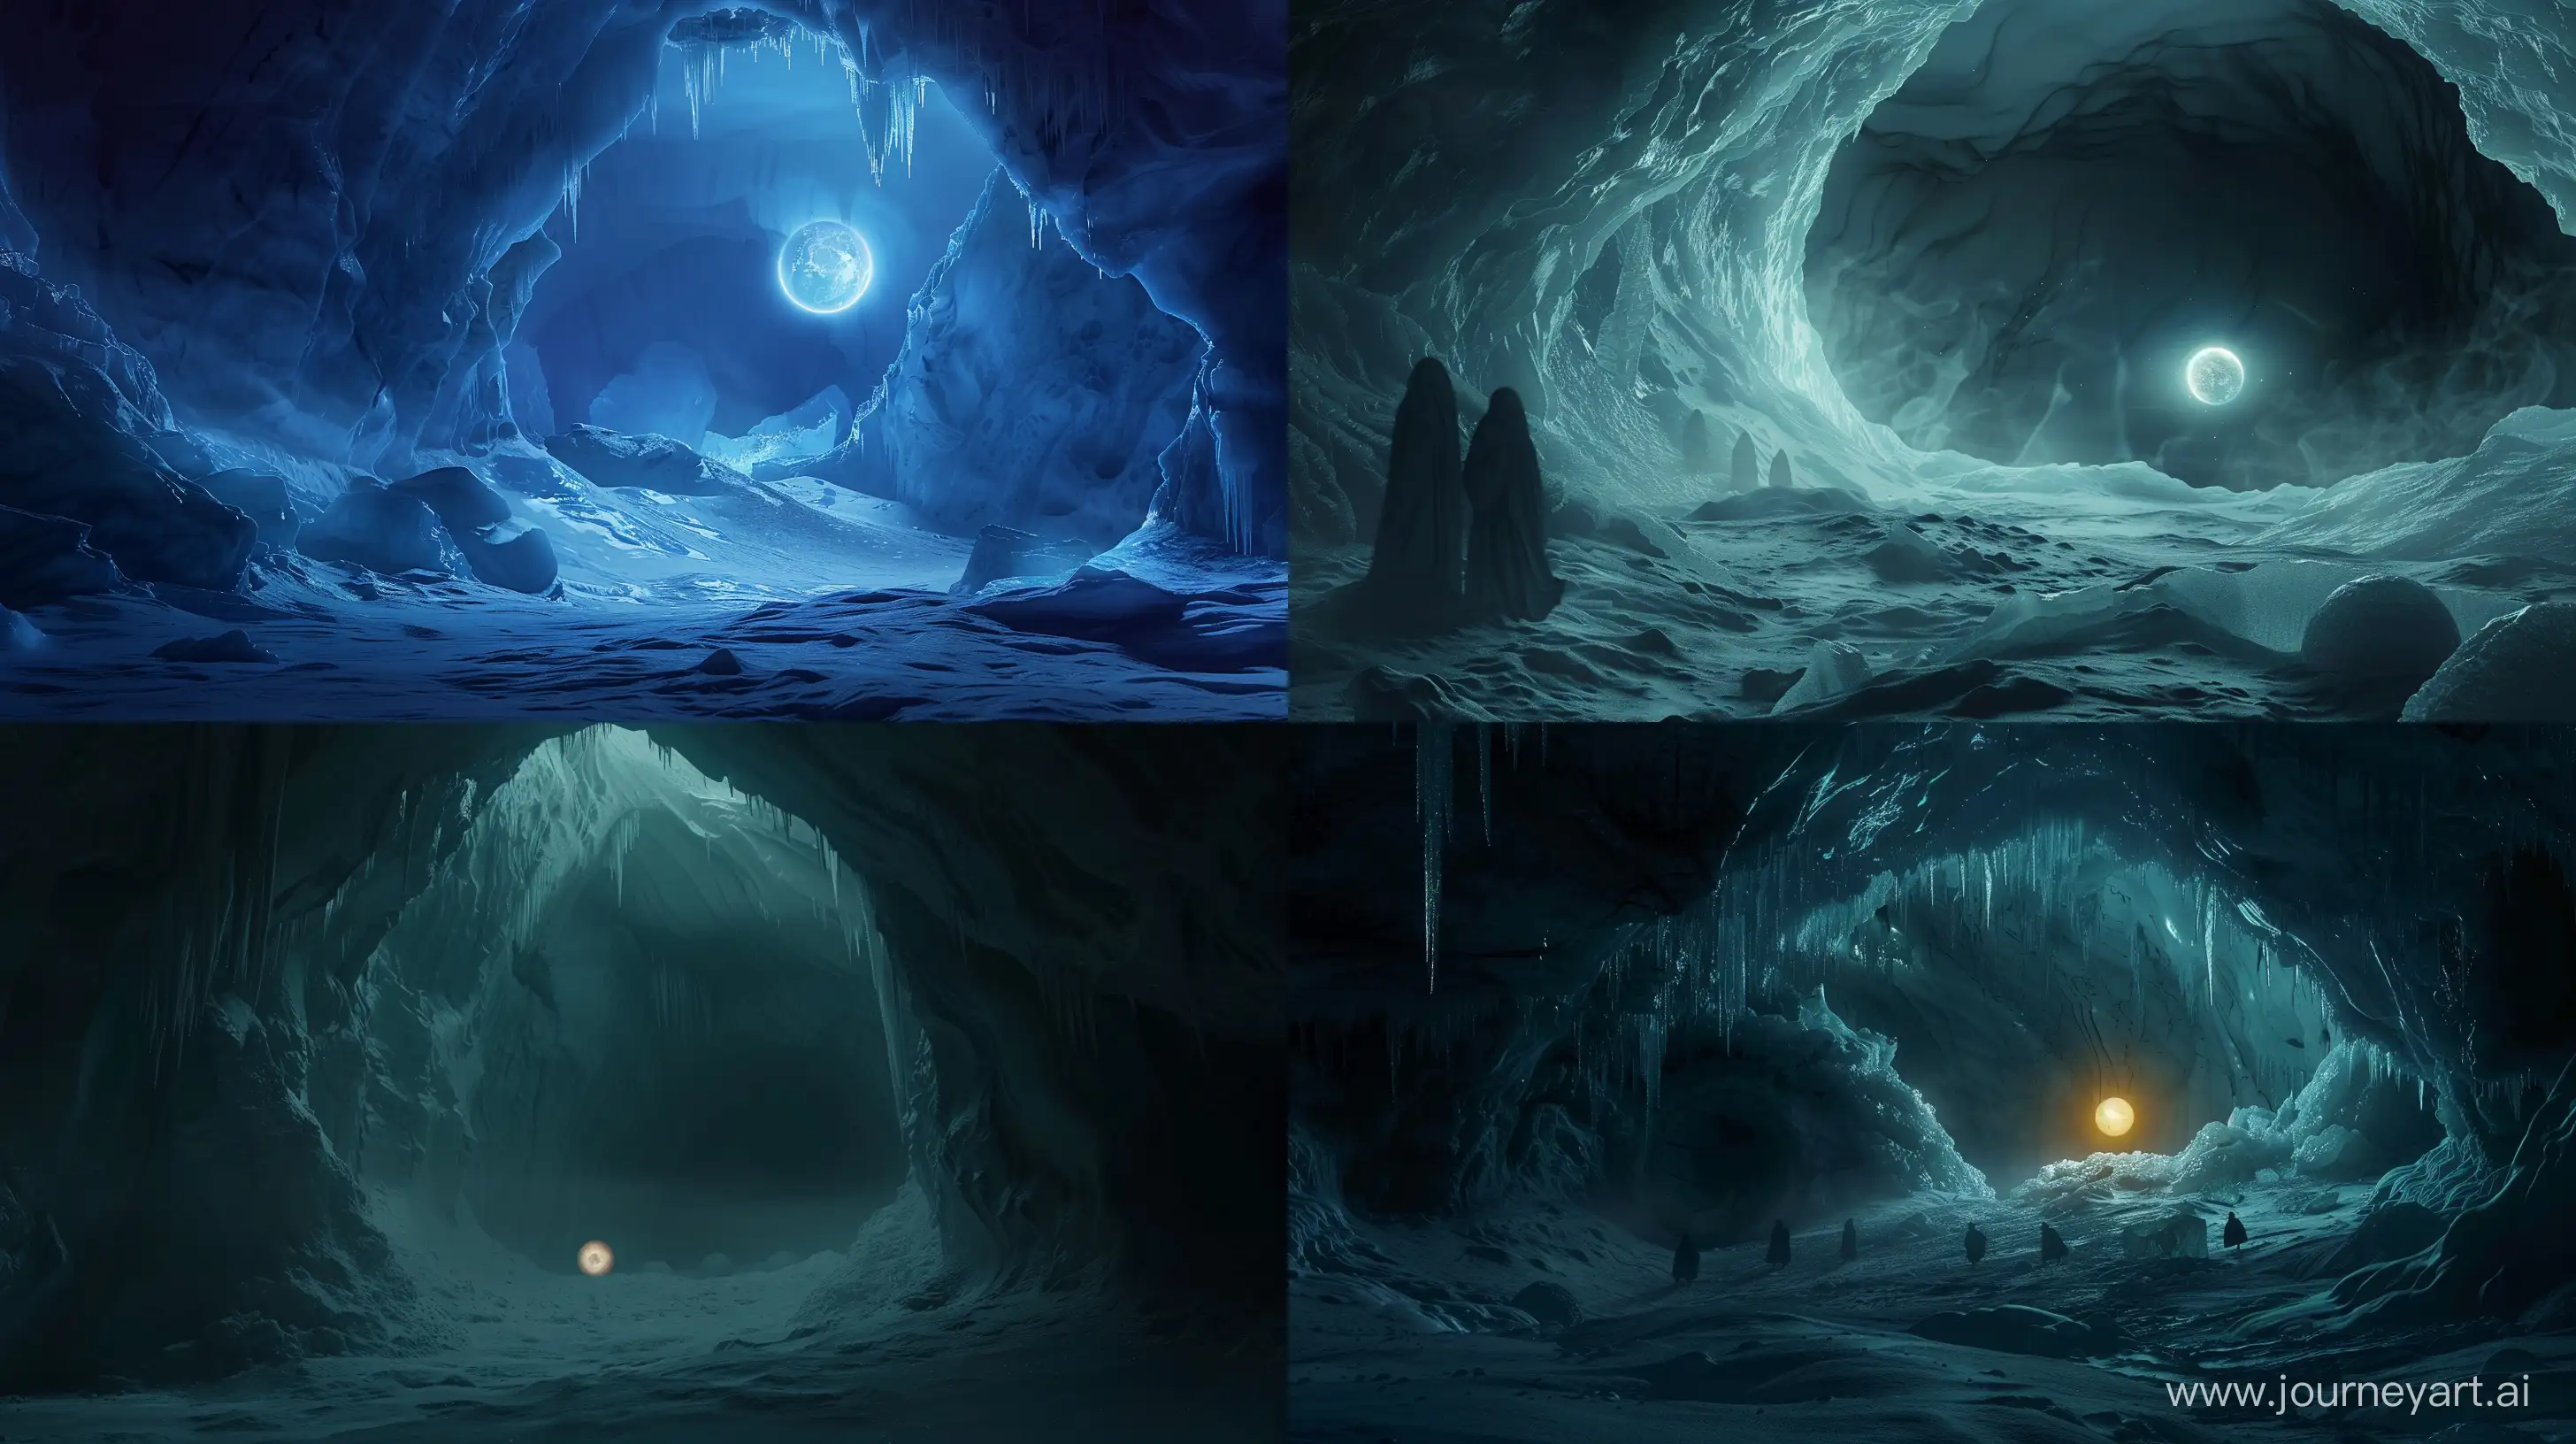 Mysterious-Glowing-Sphere-in-Dark-Icy-Cave-Surrounded-by-Ghostly-Silhouettes